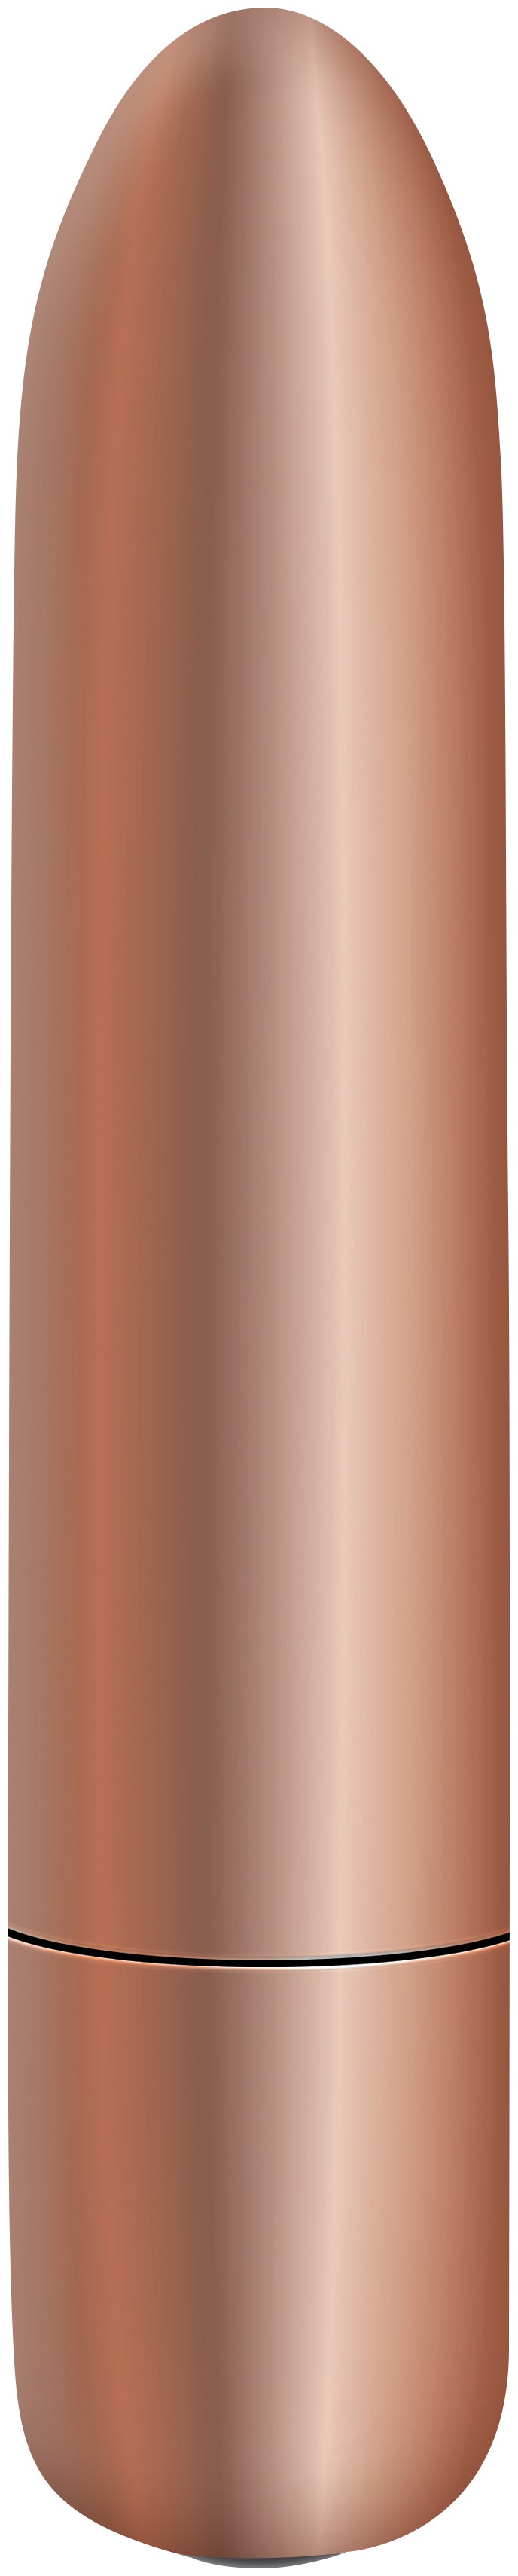 Eve's Copper Cutie Rechargeable Bullet AE-WF-7136-2